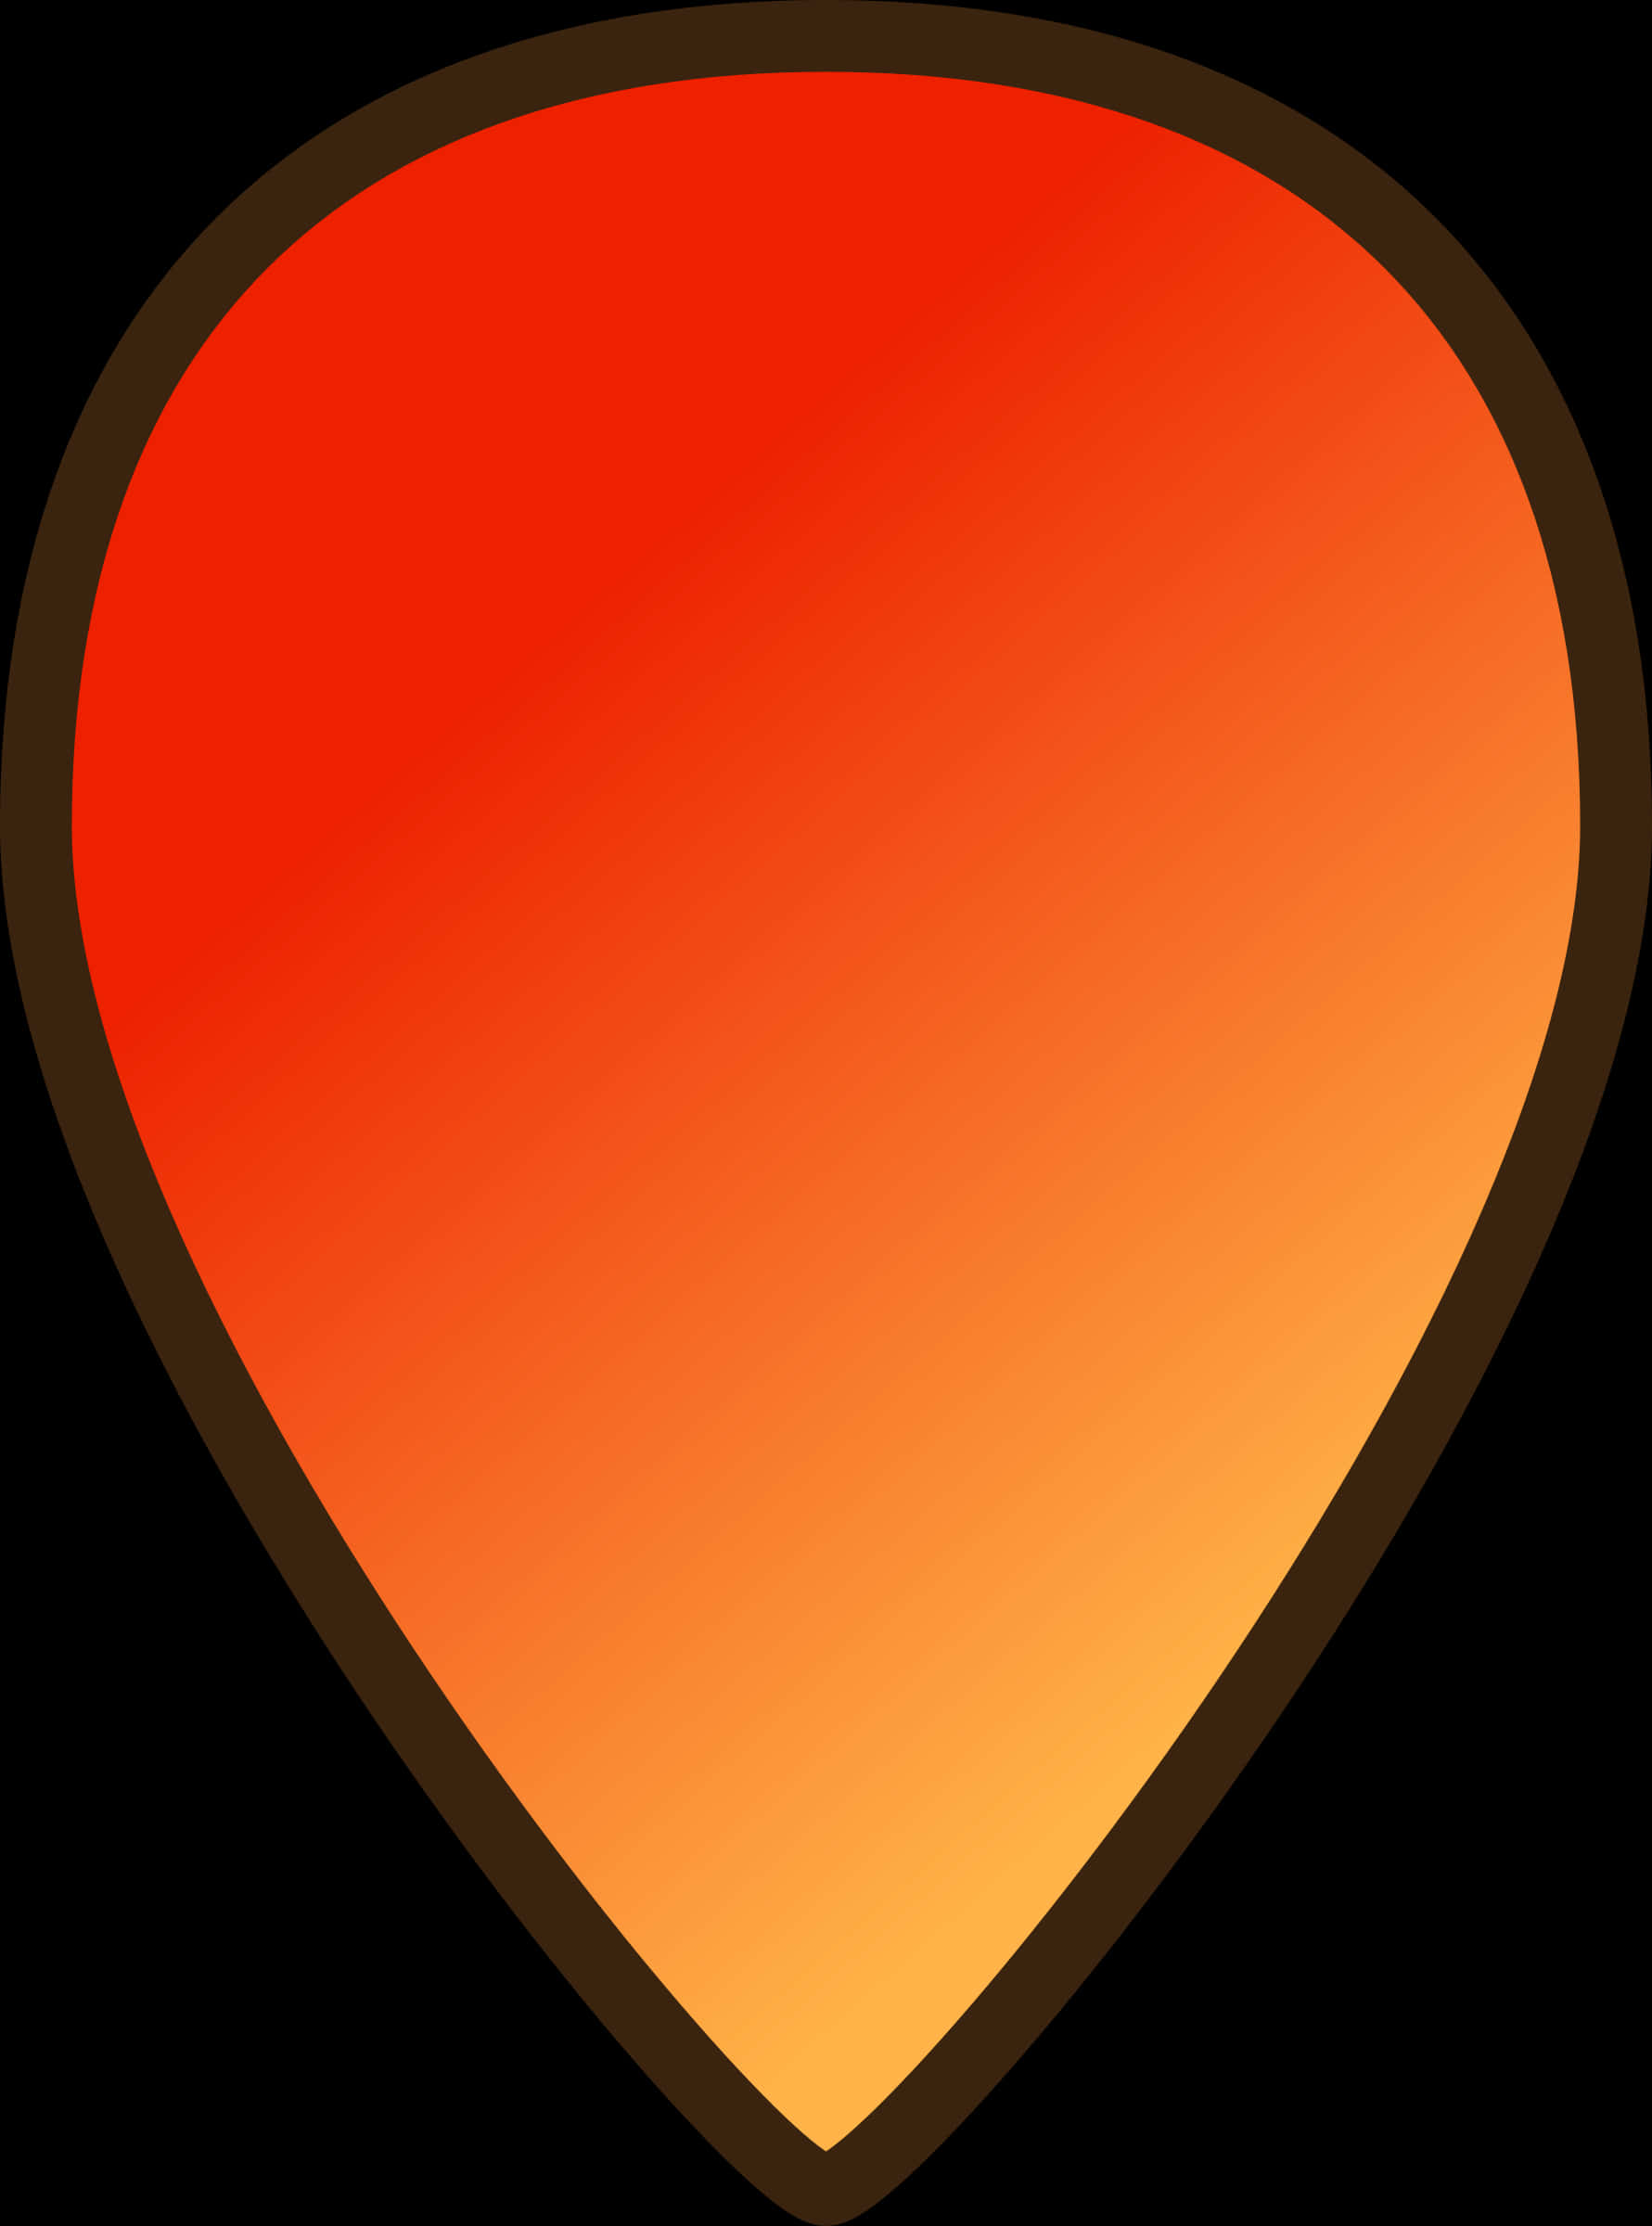 A Red And Orange Heart Shape